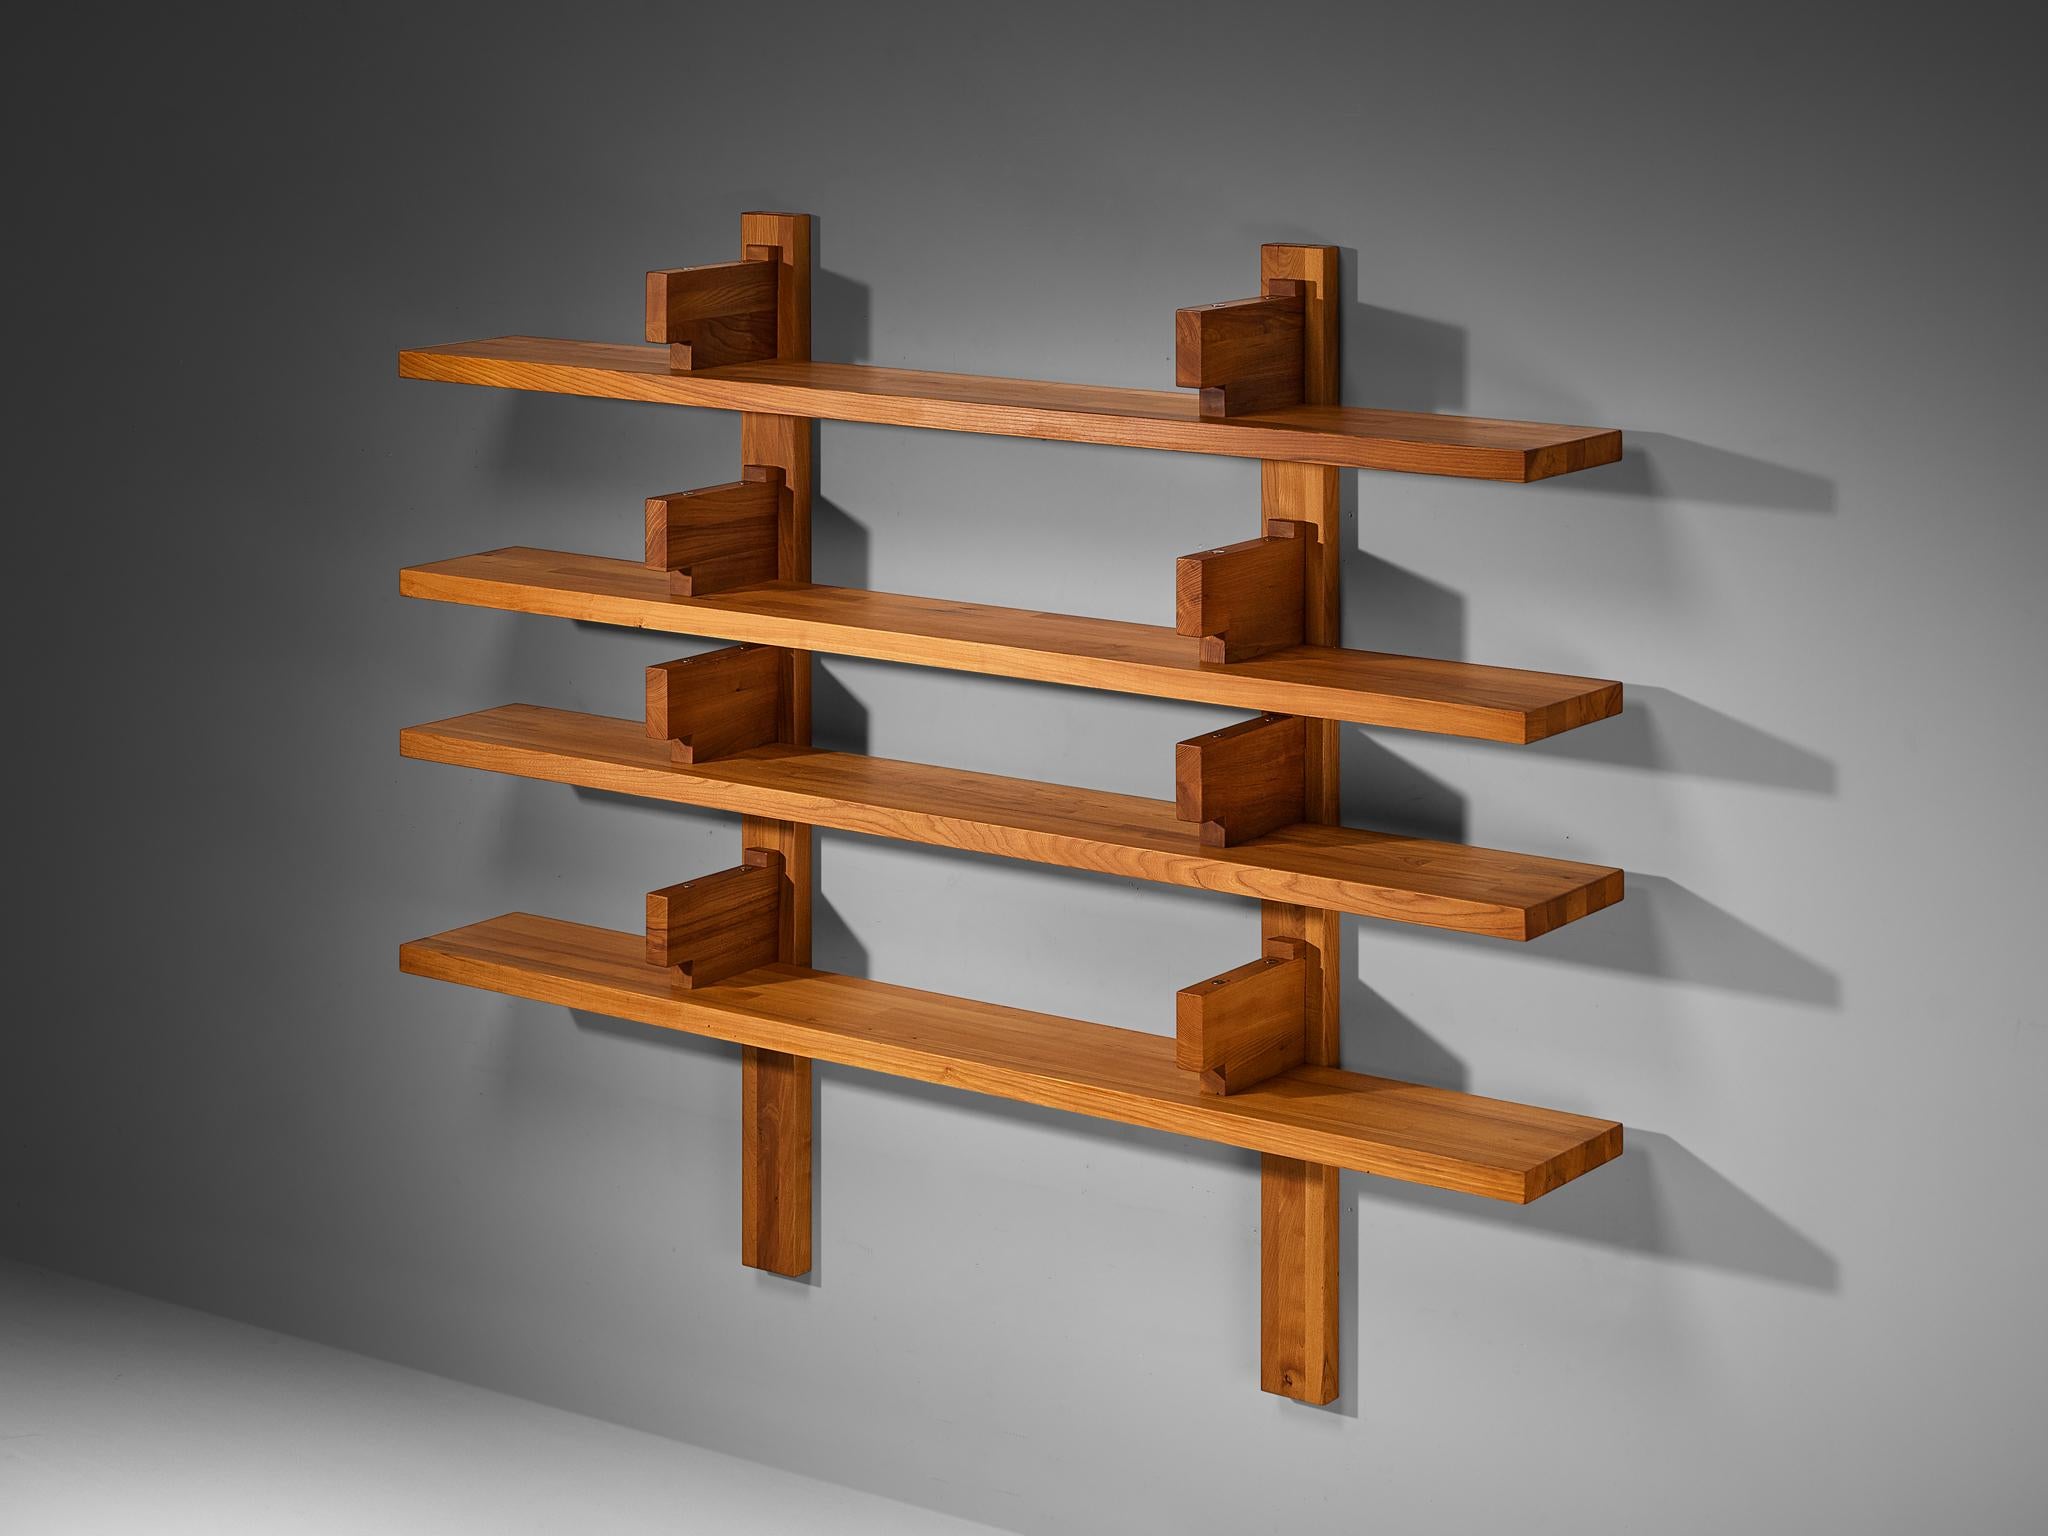 Pierre Chapo, 'bibliothèque' wall unit 2M26 version, model 'B17', elm, France, 1960s

This is a rare and large model 'B17' wall unit designed by Pierre Chapo. It is the largest version of this quintessential piece by Chapo. The shelving system was